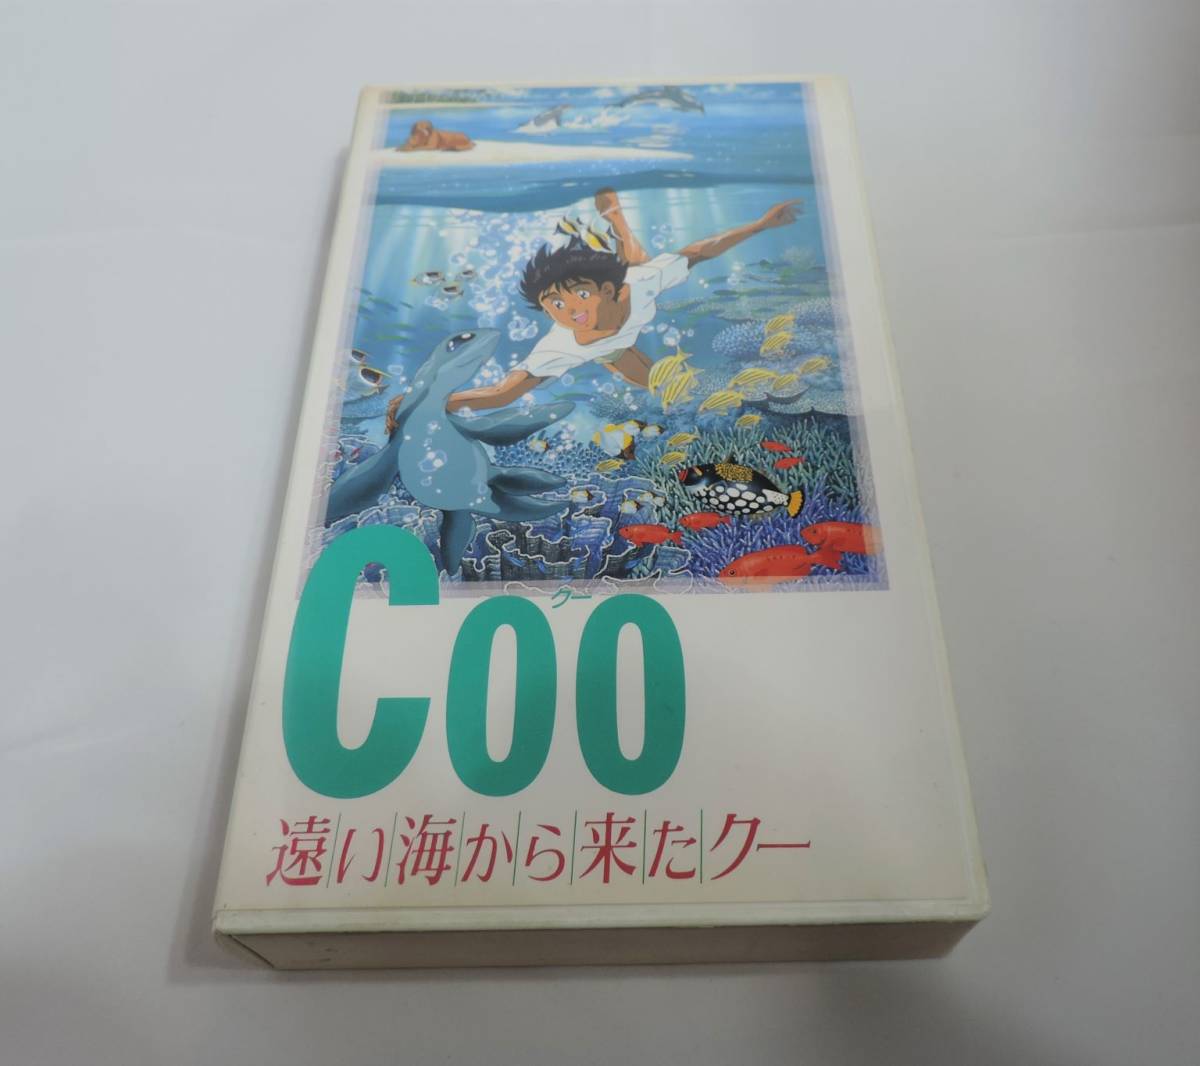 Coo 遠い海から来たクー　VHS